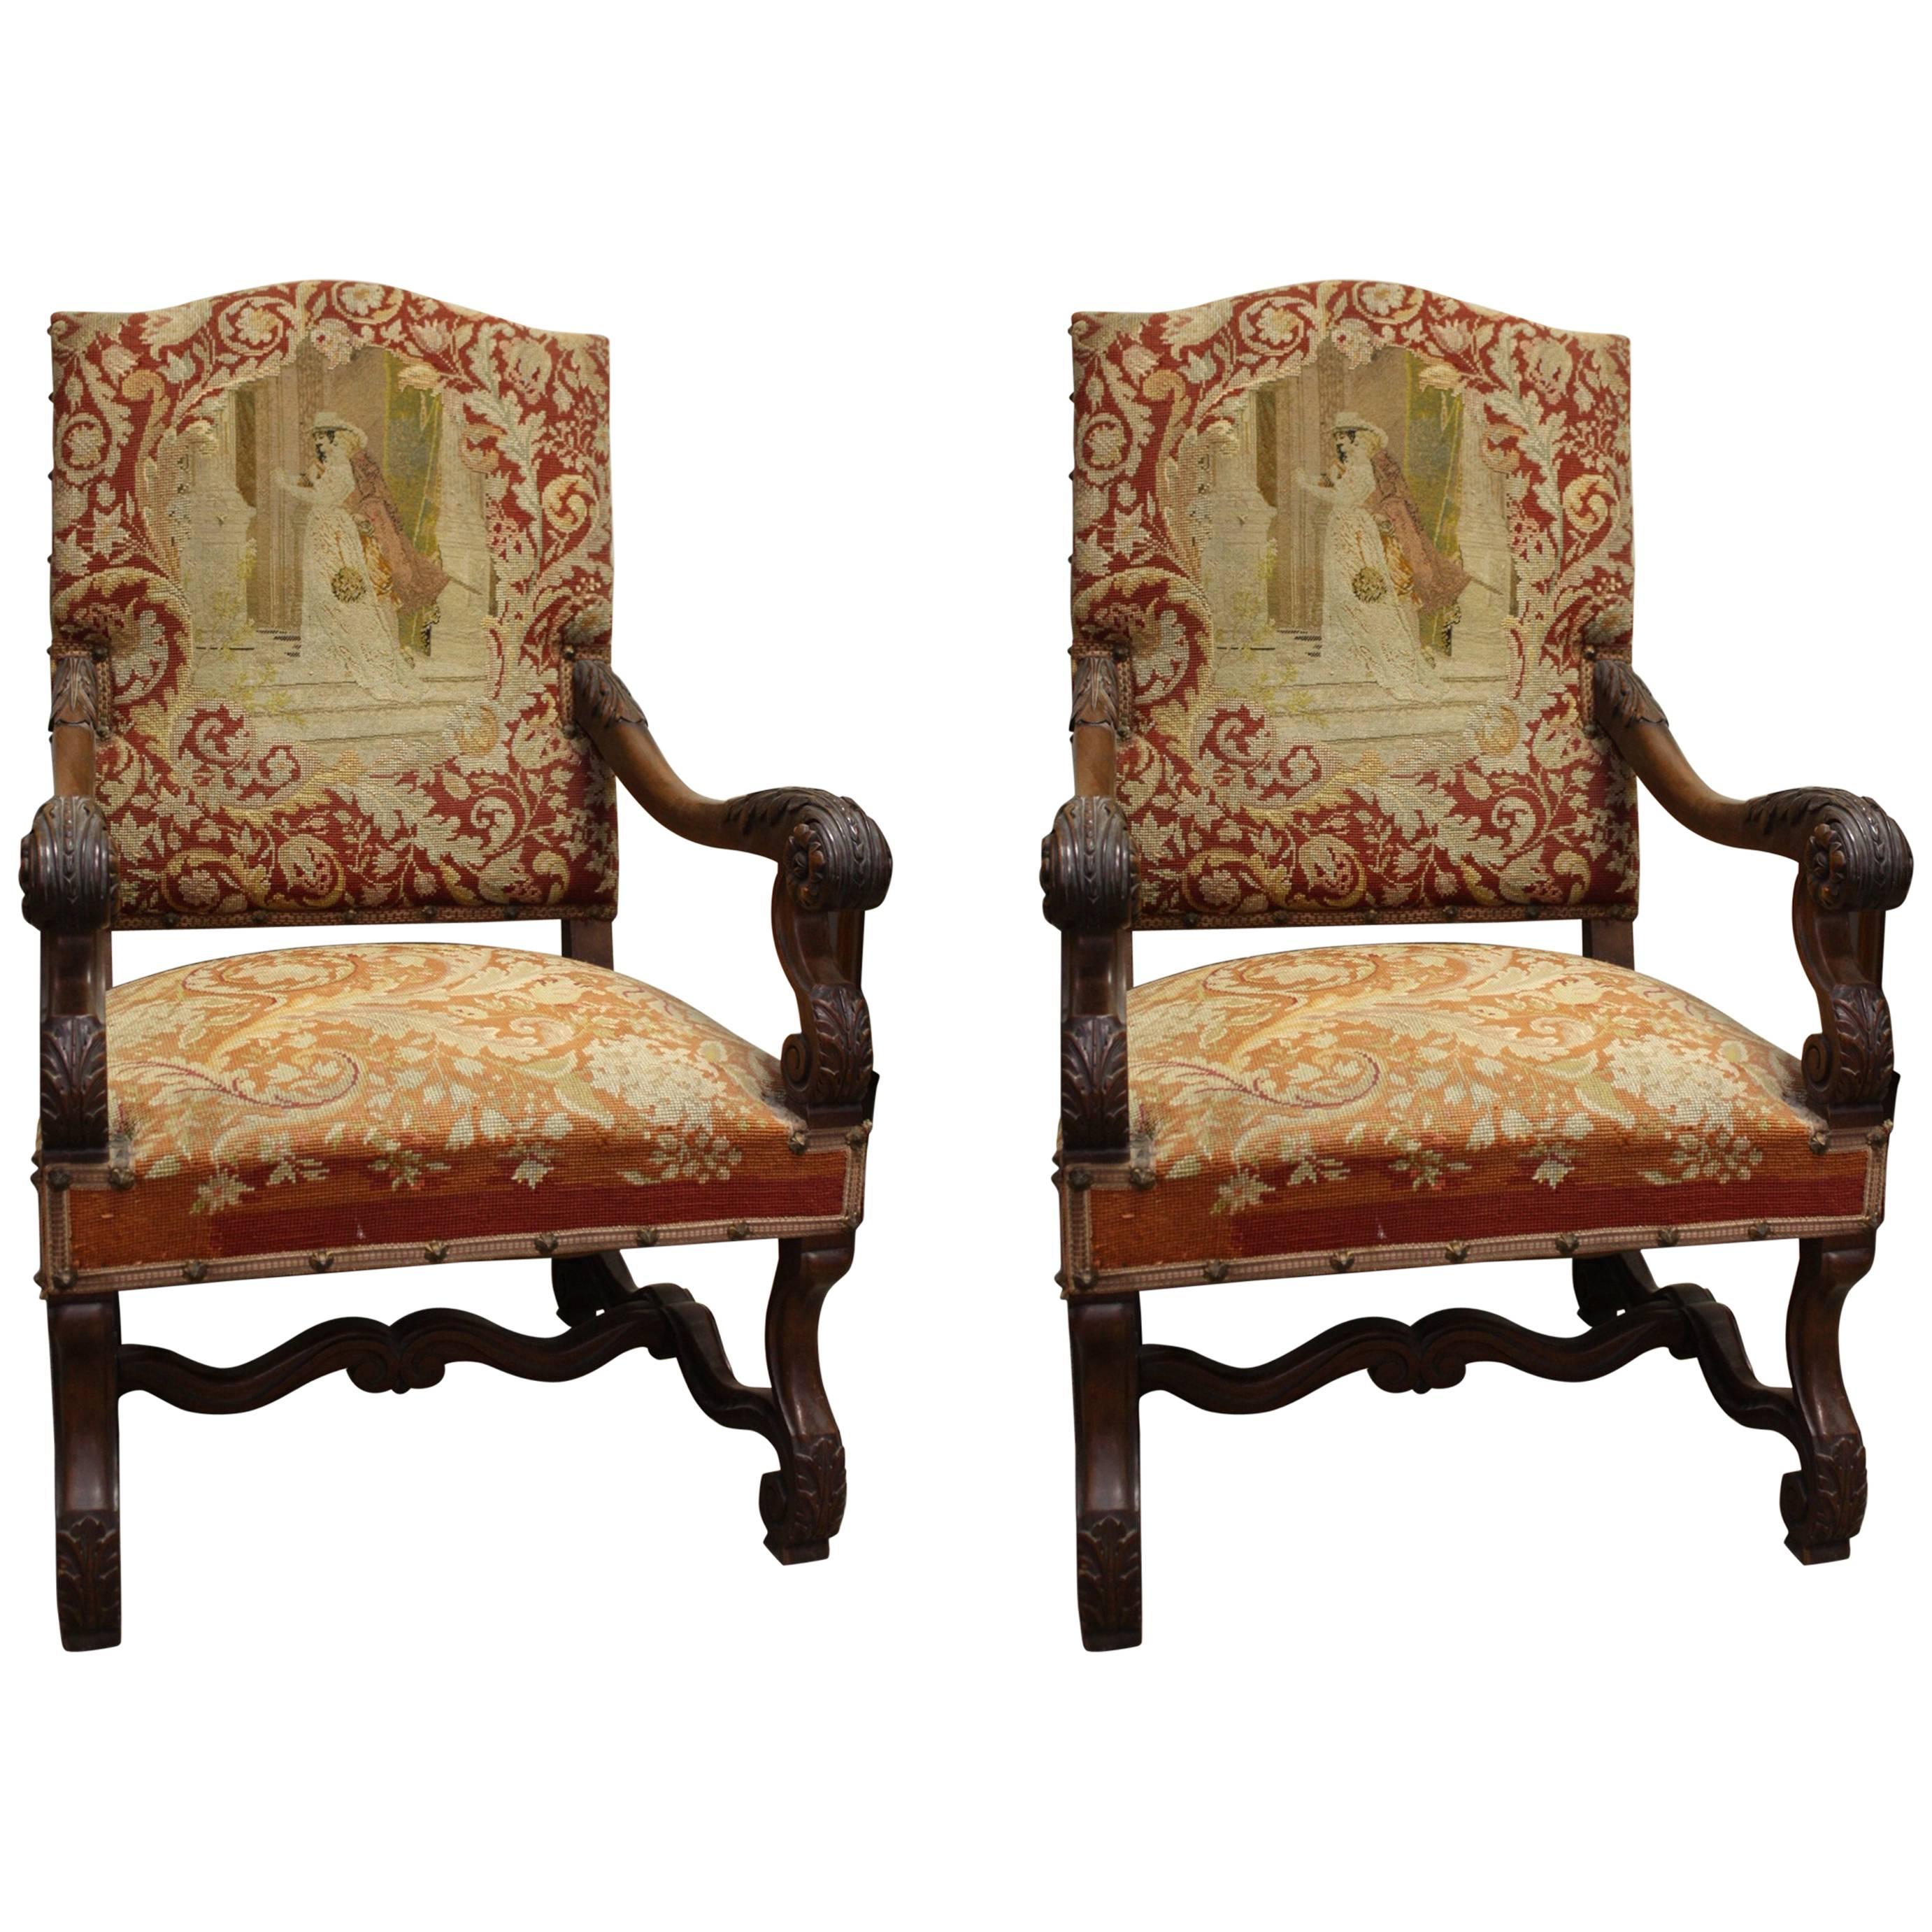 Two 19th Century, French Louis XIV Walnut Needlepoint Armchair